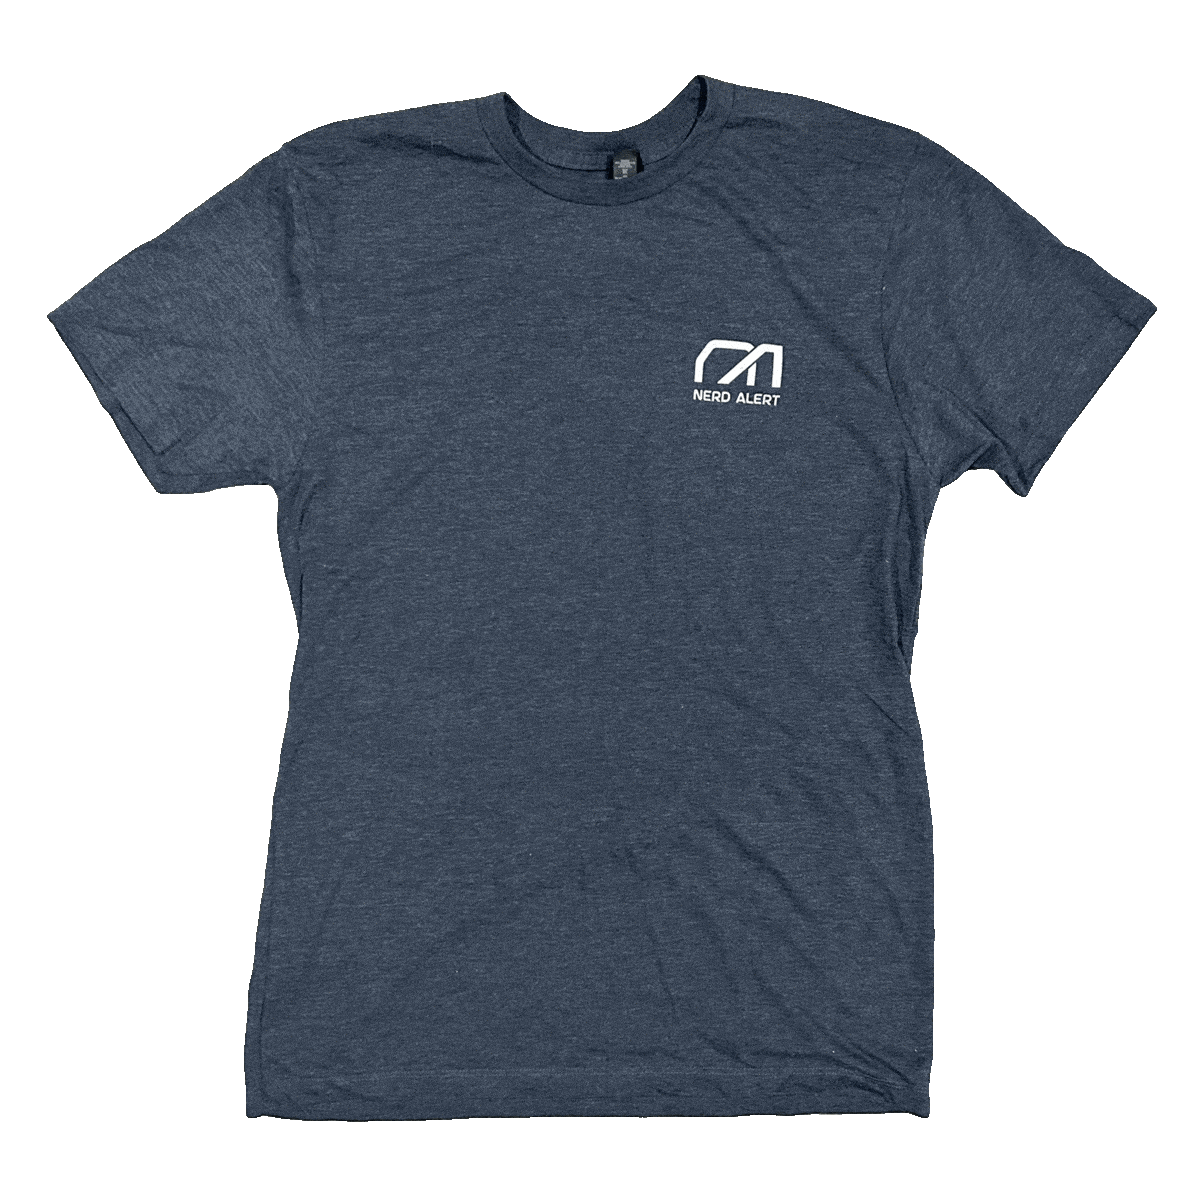 A navy blue T-shirt with the Nerd Alert logo in white on the front, and two cartoon spacemen on the back.